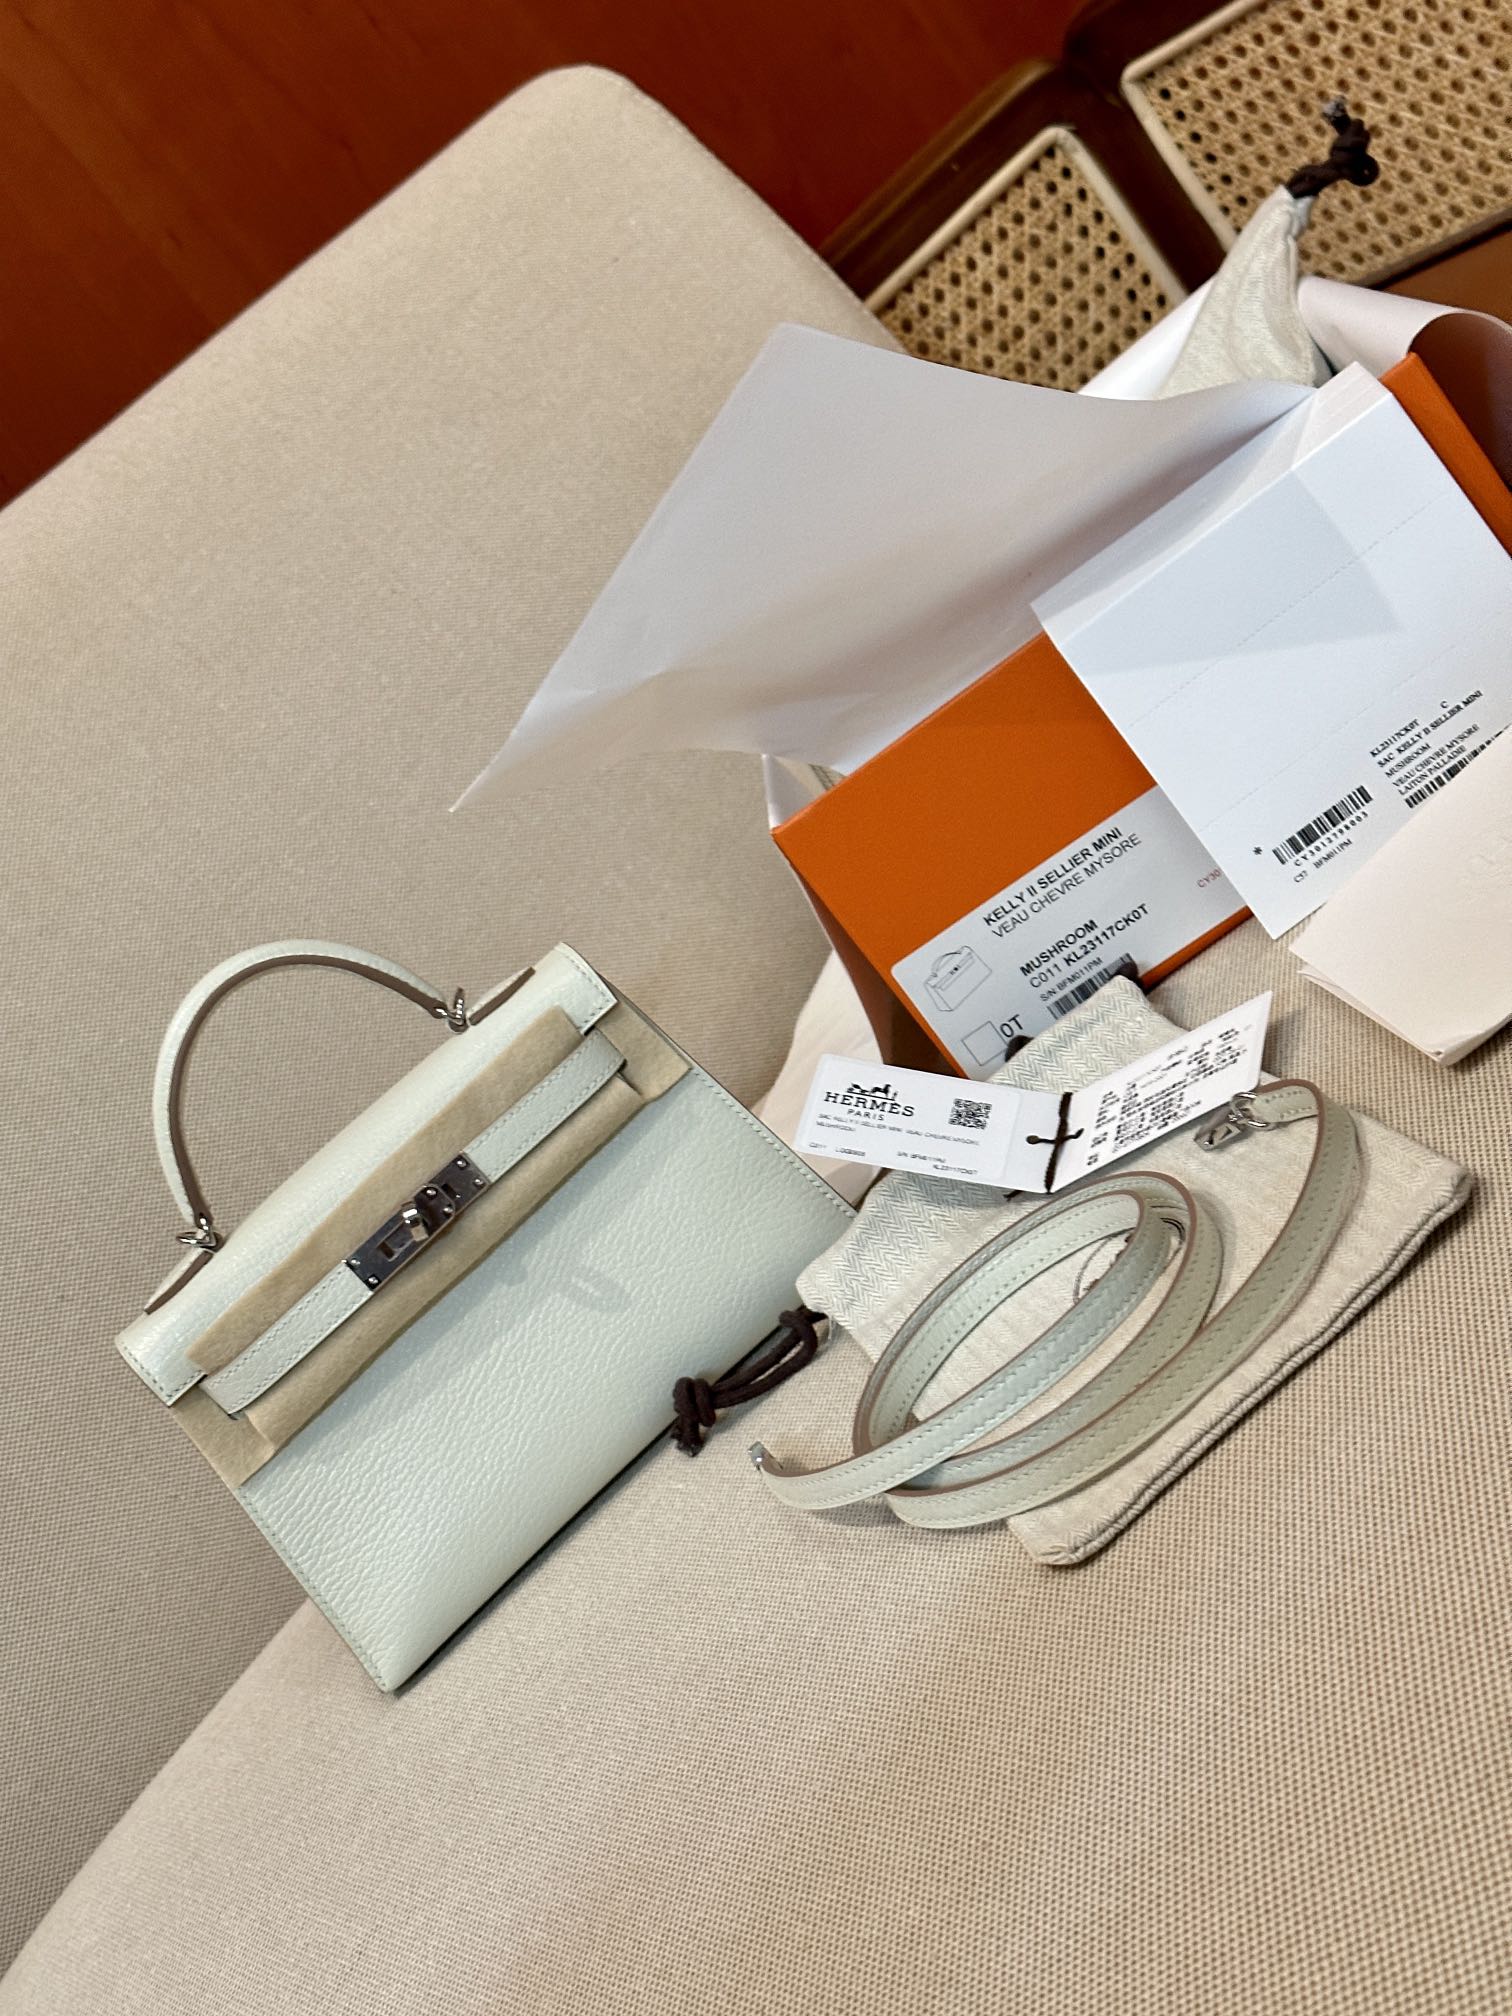 A color from 2023 Hermes ,0T Mushroom.Hermes Kelly25,Togo leather